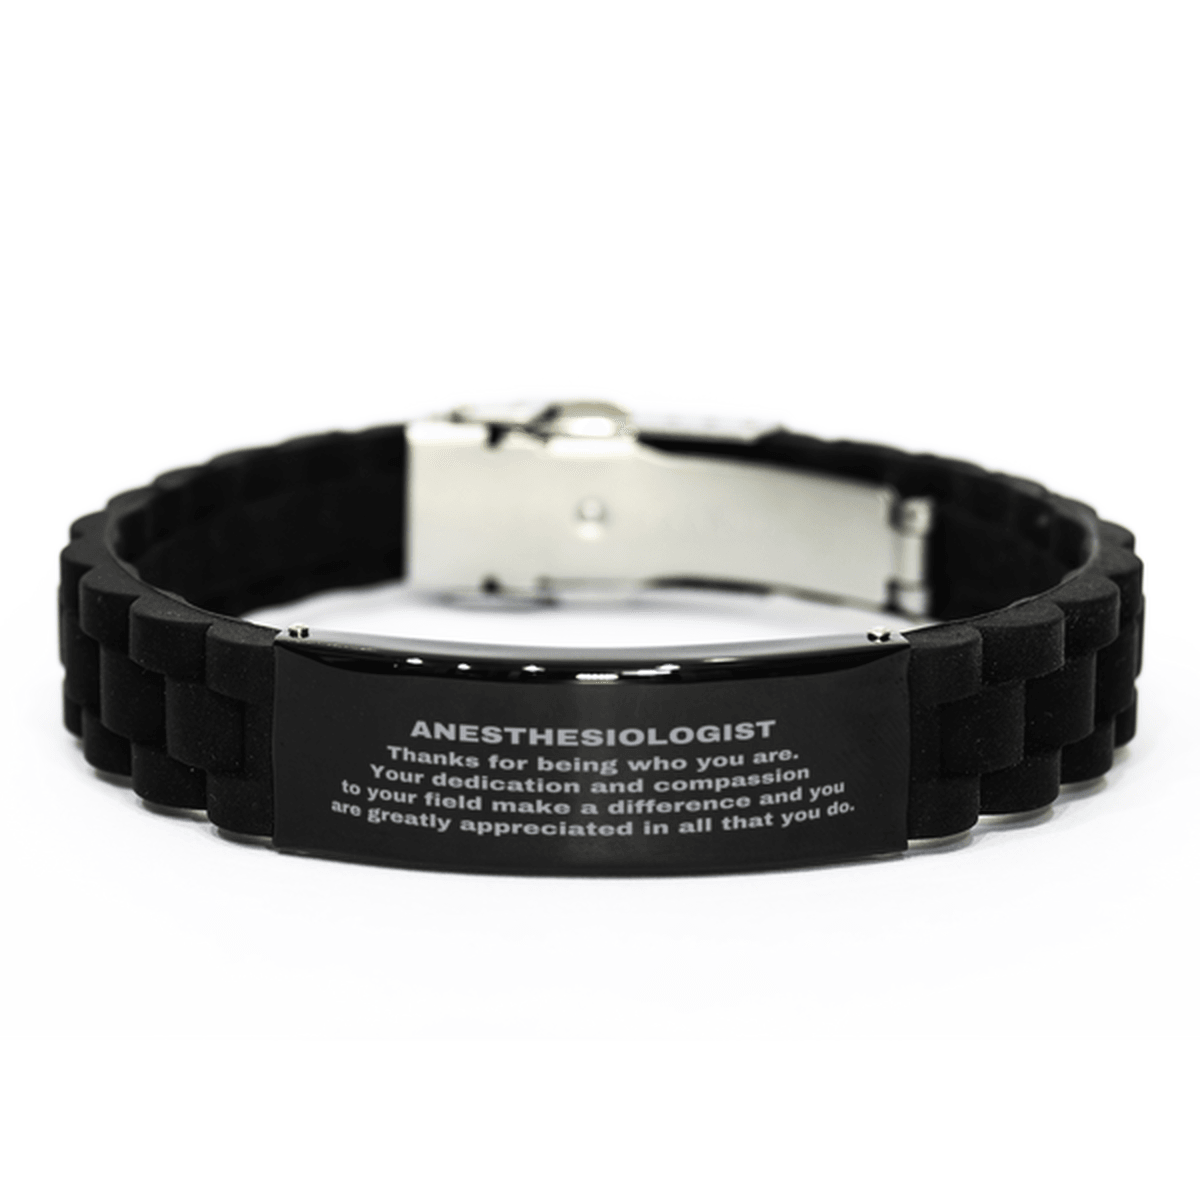 Anesthesiologist Black Glidelock Clasp Engraved Bracelet - Thanks for being who you are - Birthday Christmas Jewelry Gifts Coworkers Colleague Boss - Mallard Moon Gift Shop